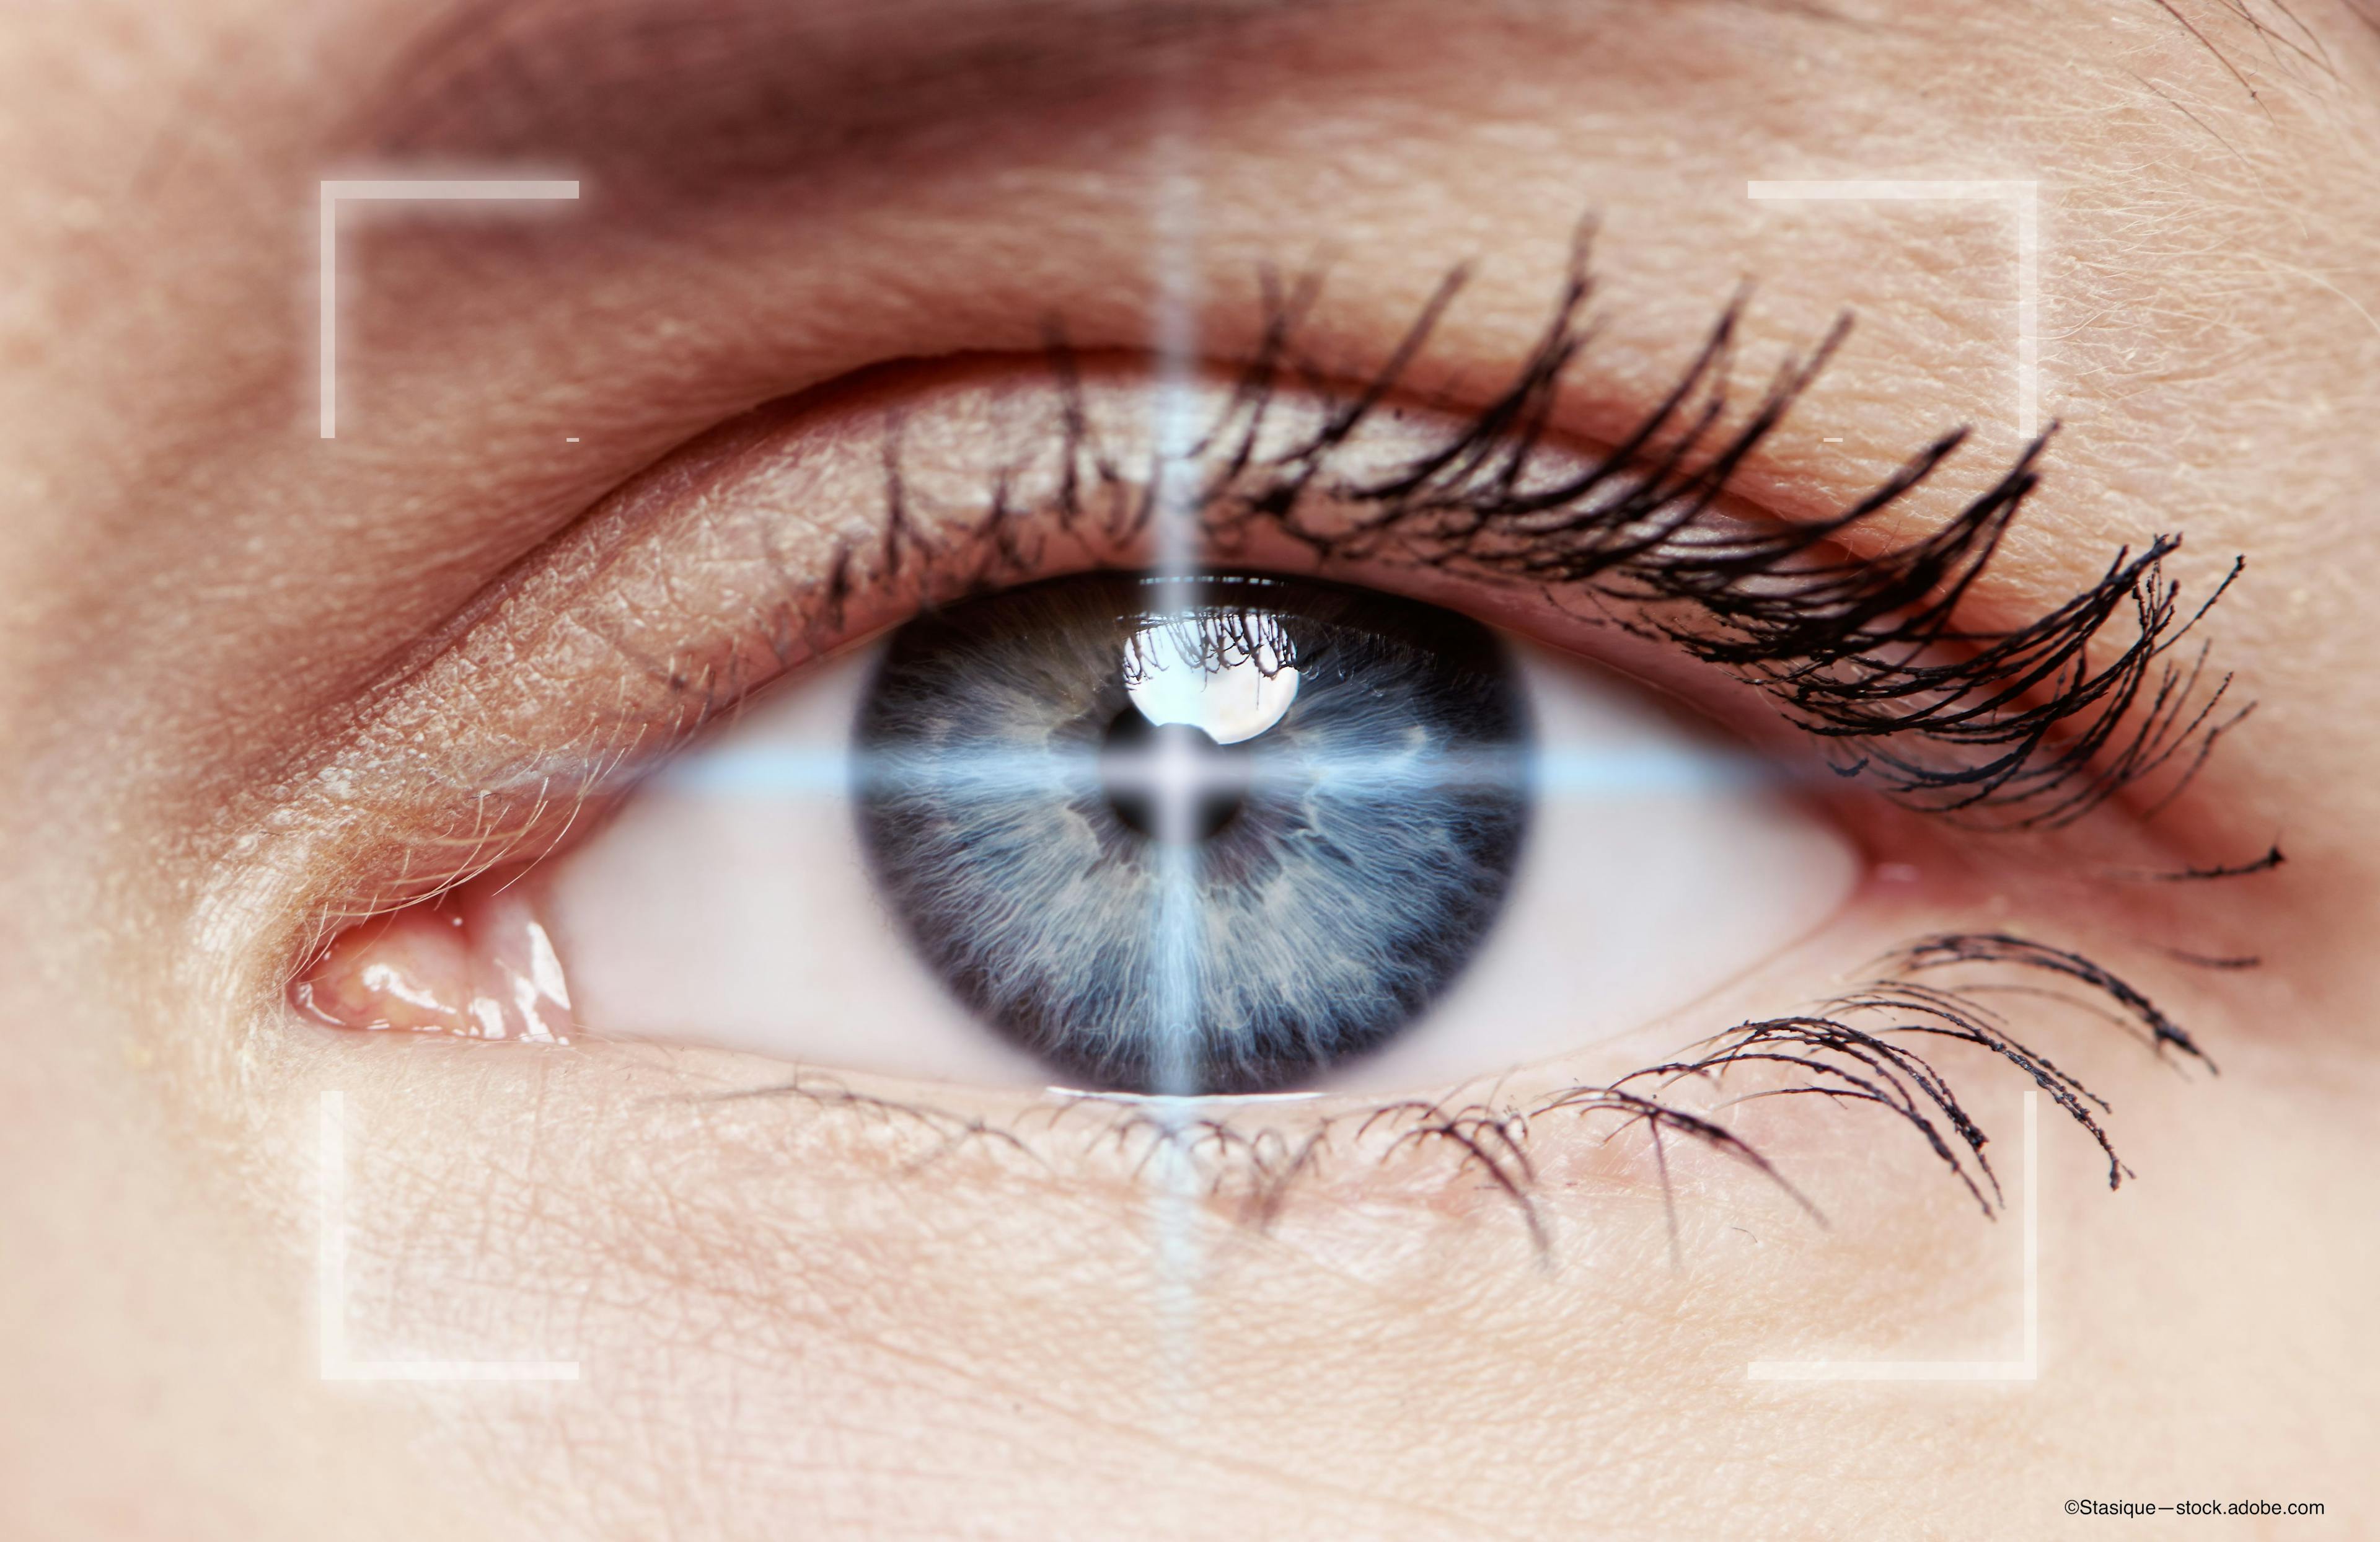 Laser imaging system may offer early detection, treatment for eye diseases that cause blindness